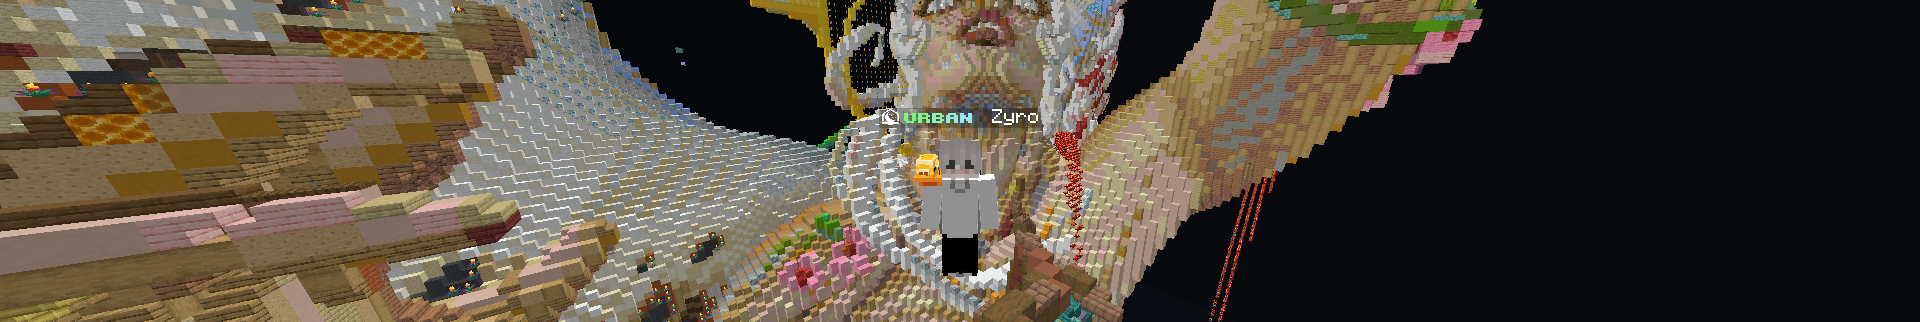 Zyro Builds's profile banner